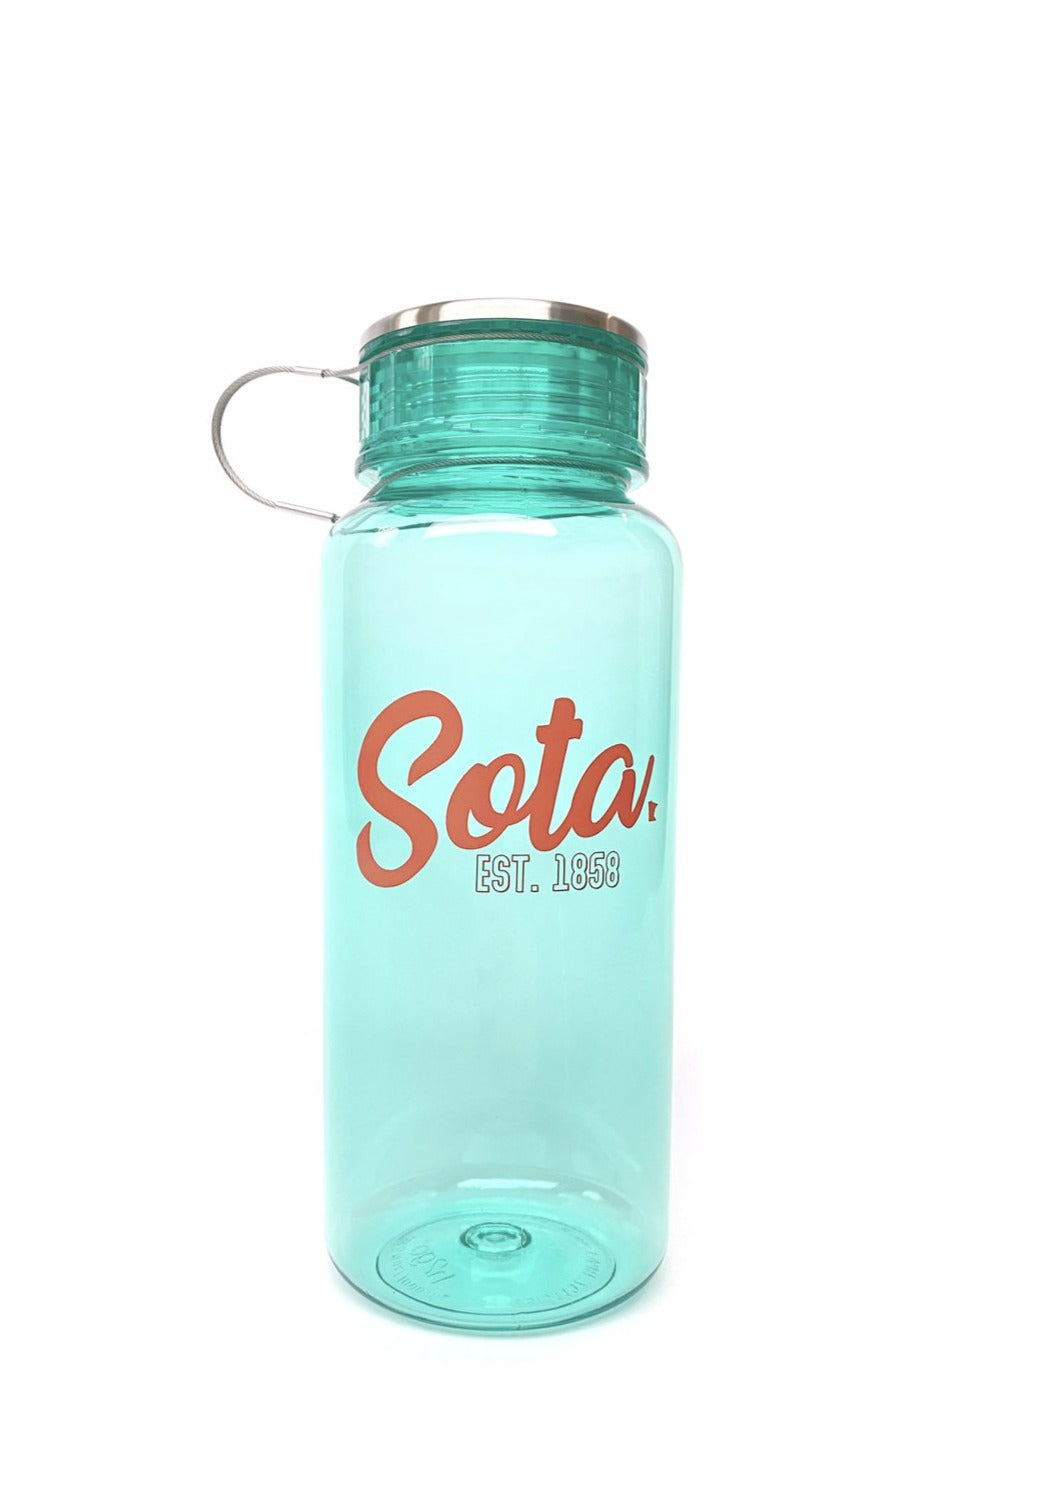 Teal h2go Sota Water Bottle Home & Lifestyle